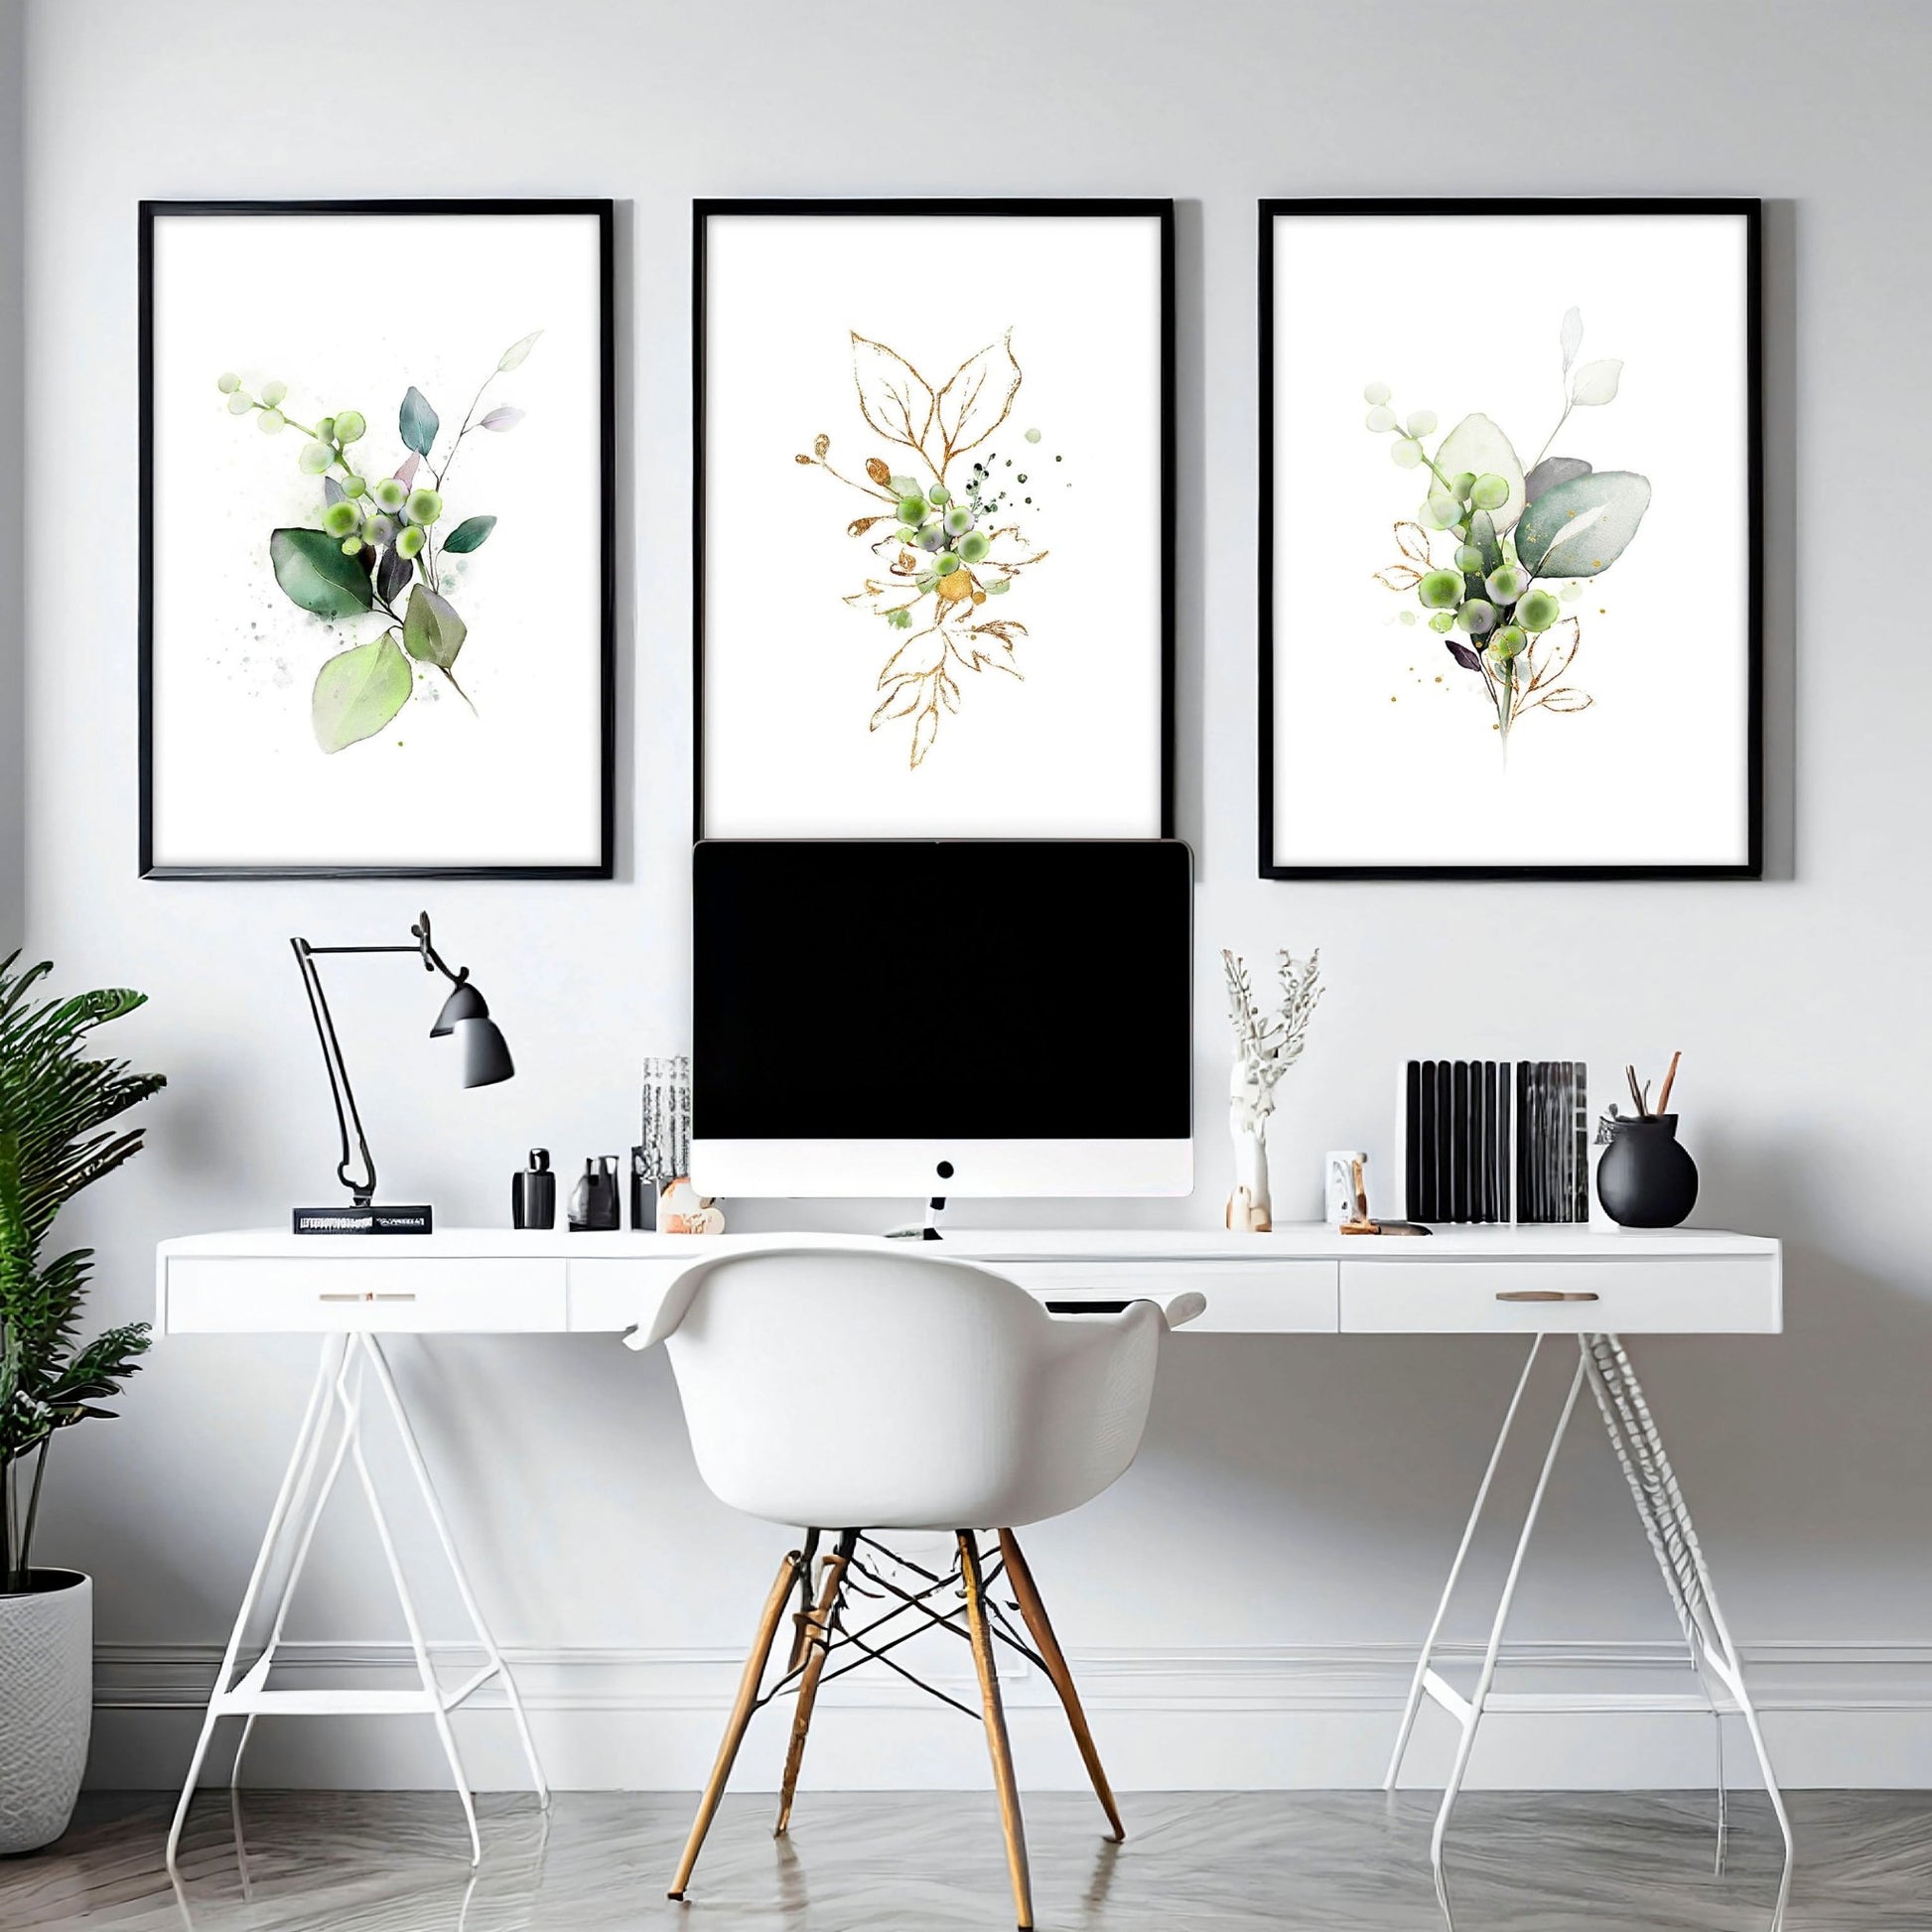 Botanical green | set of 3 wall art prints for office - About Wall Art